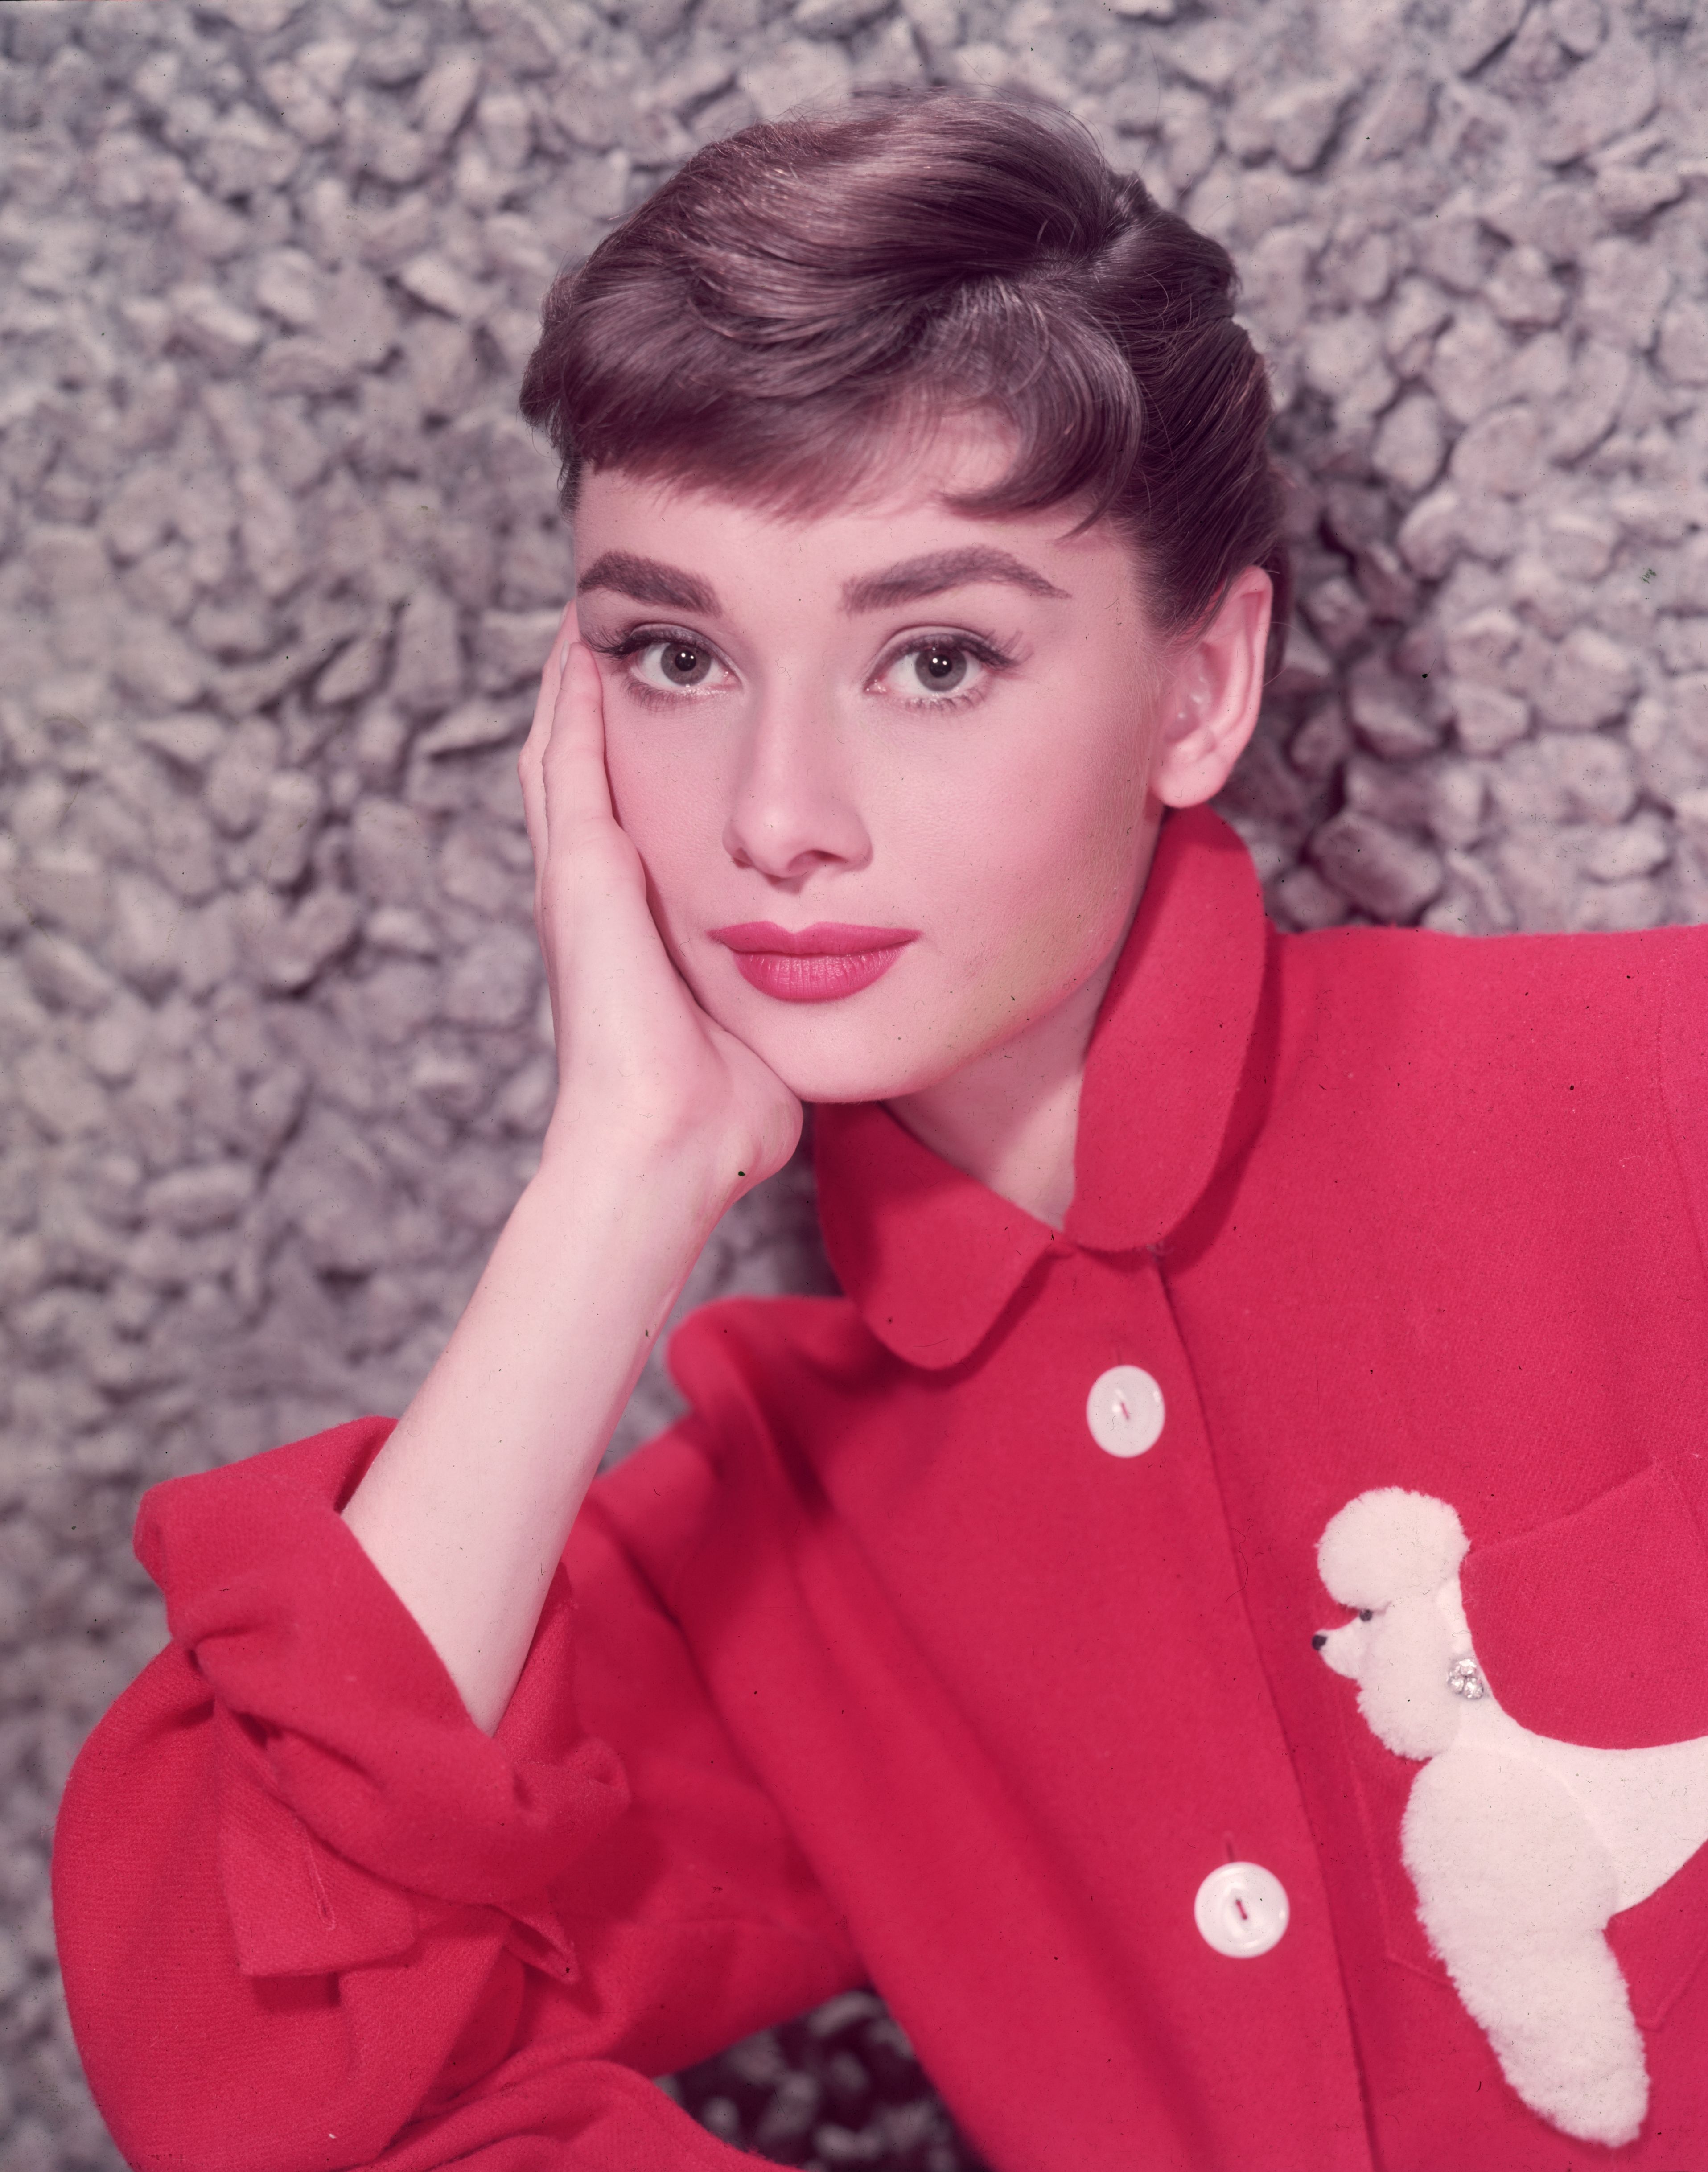 Headshot portrait of Belgian-born actor Audrey Hepburn (1929 - 1993) leaning on her hand in a red jacket with a poodle applique on January 01, 1955 | Photo: Getty Images